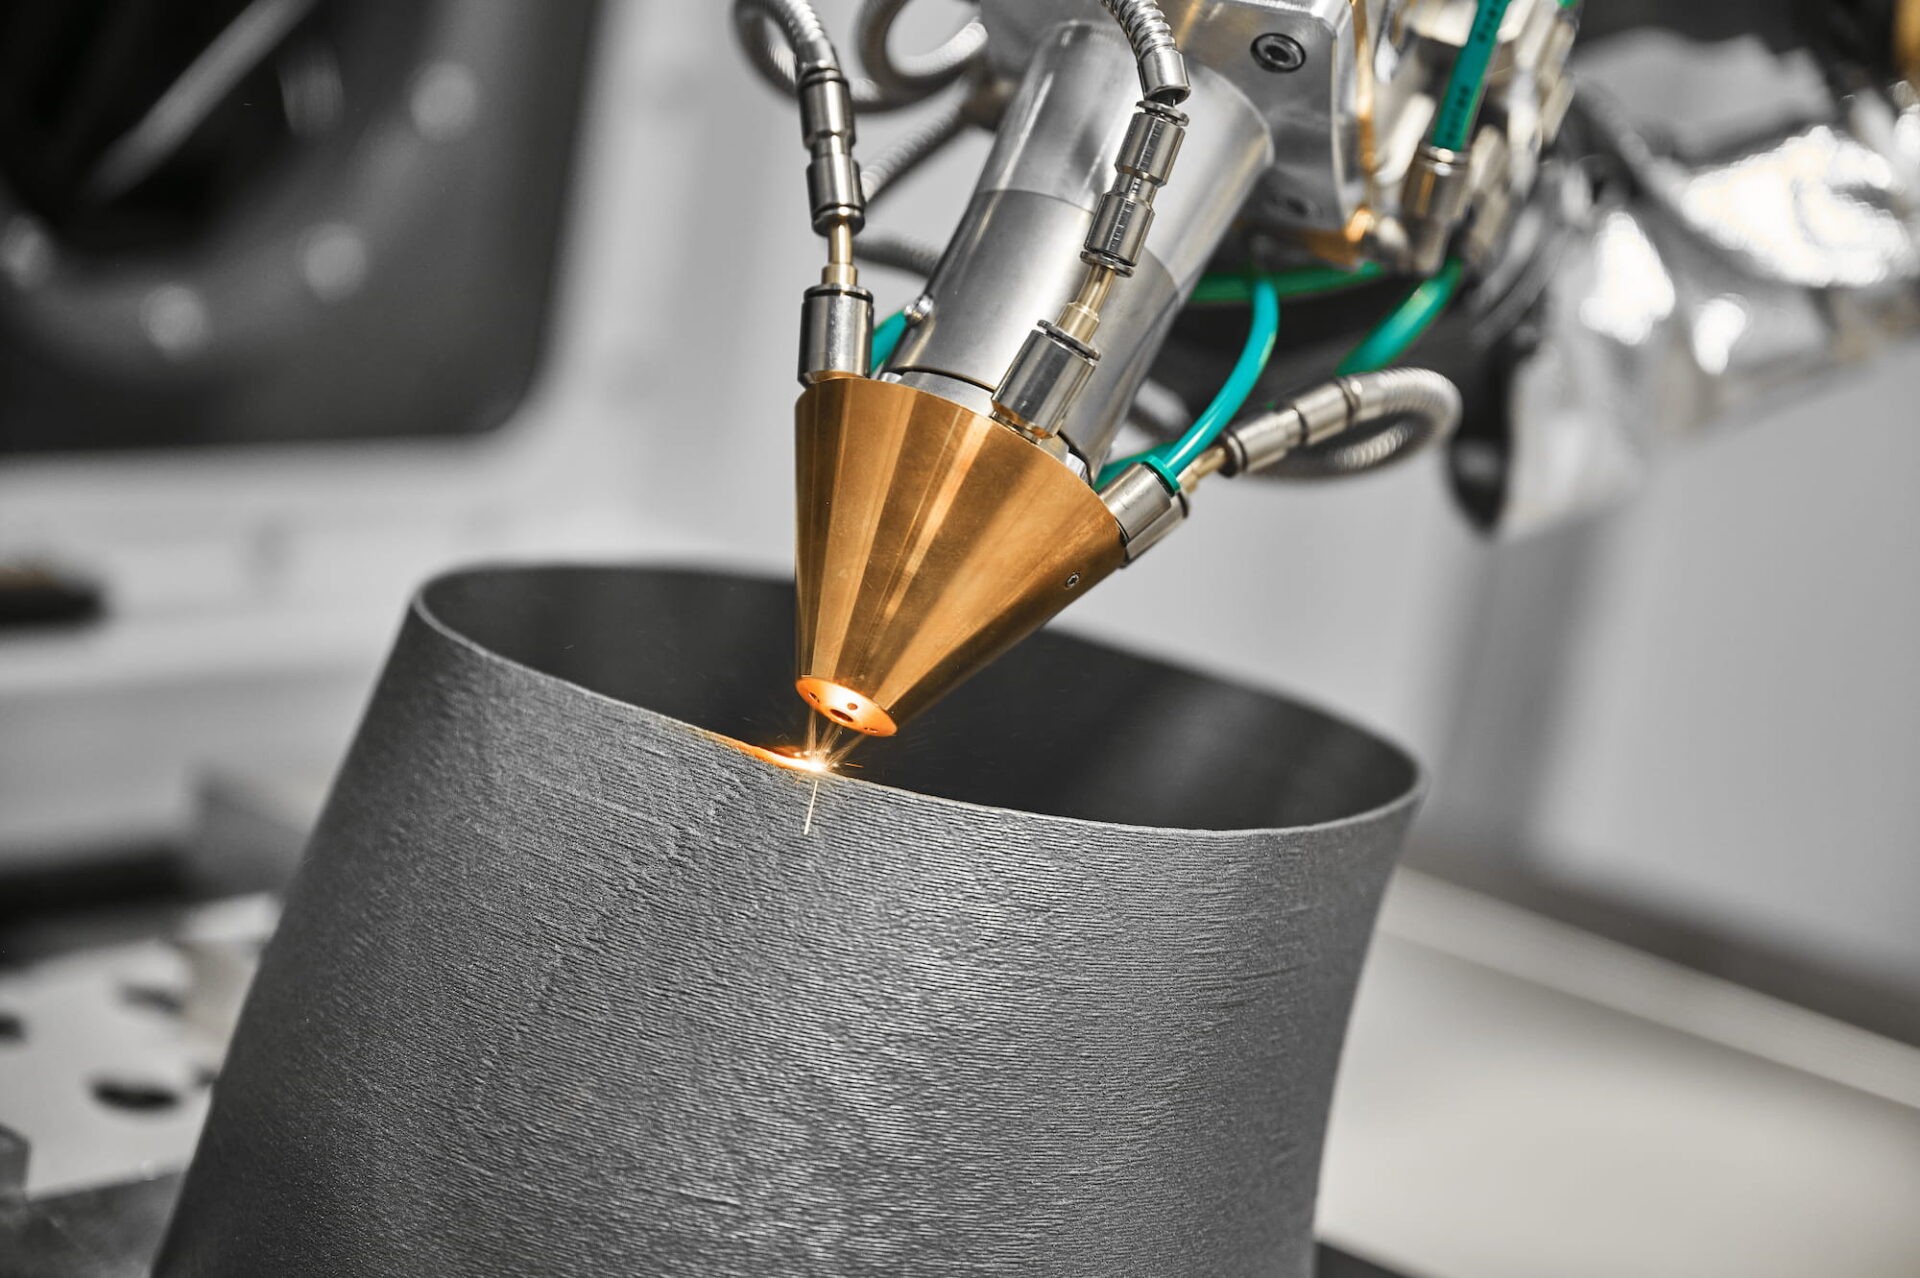 To harness new fabrication modes, additive manufacturing testing is necessary.